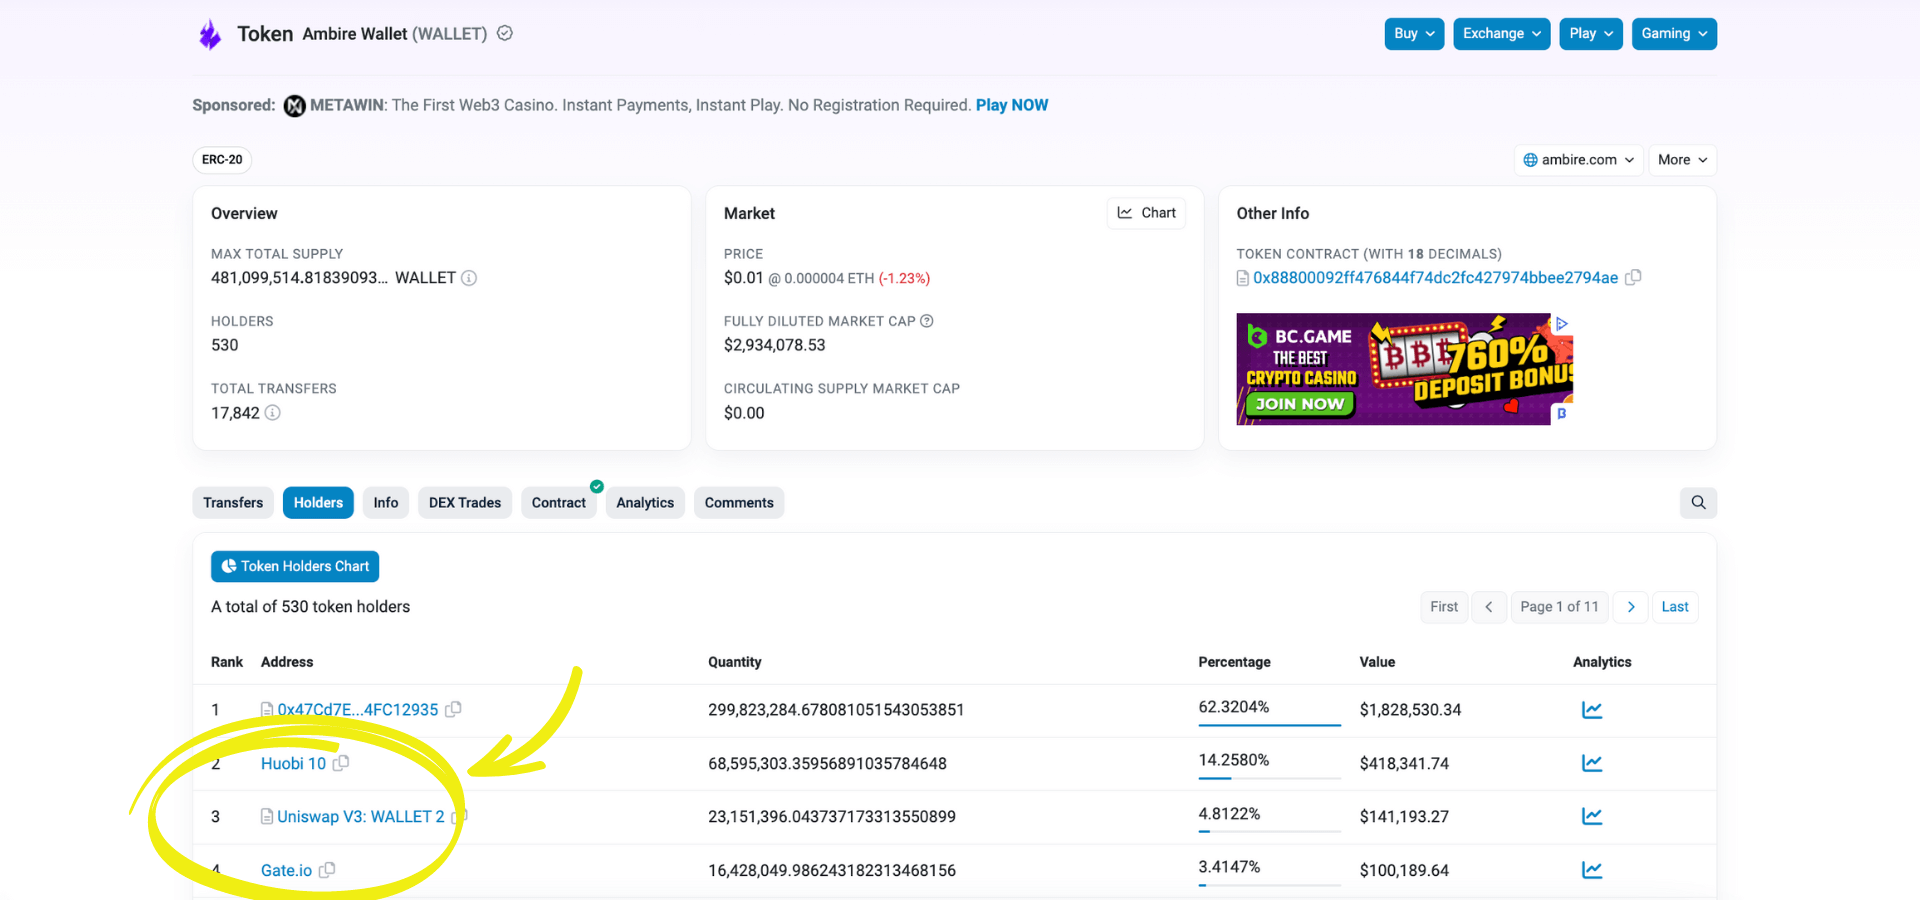 Ambire WALLET token holders on Etherscan